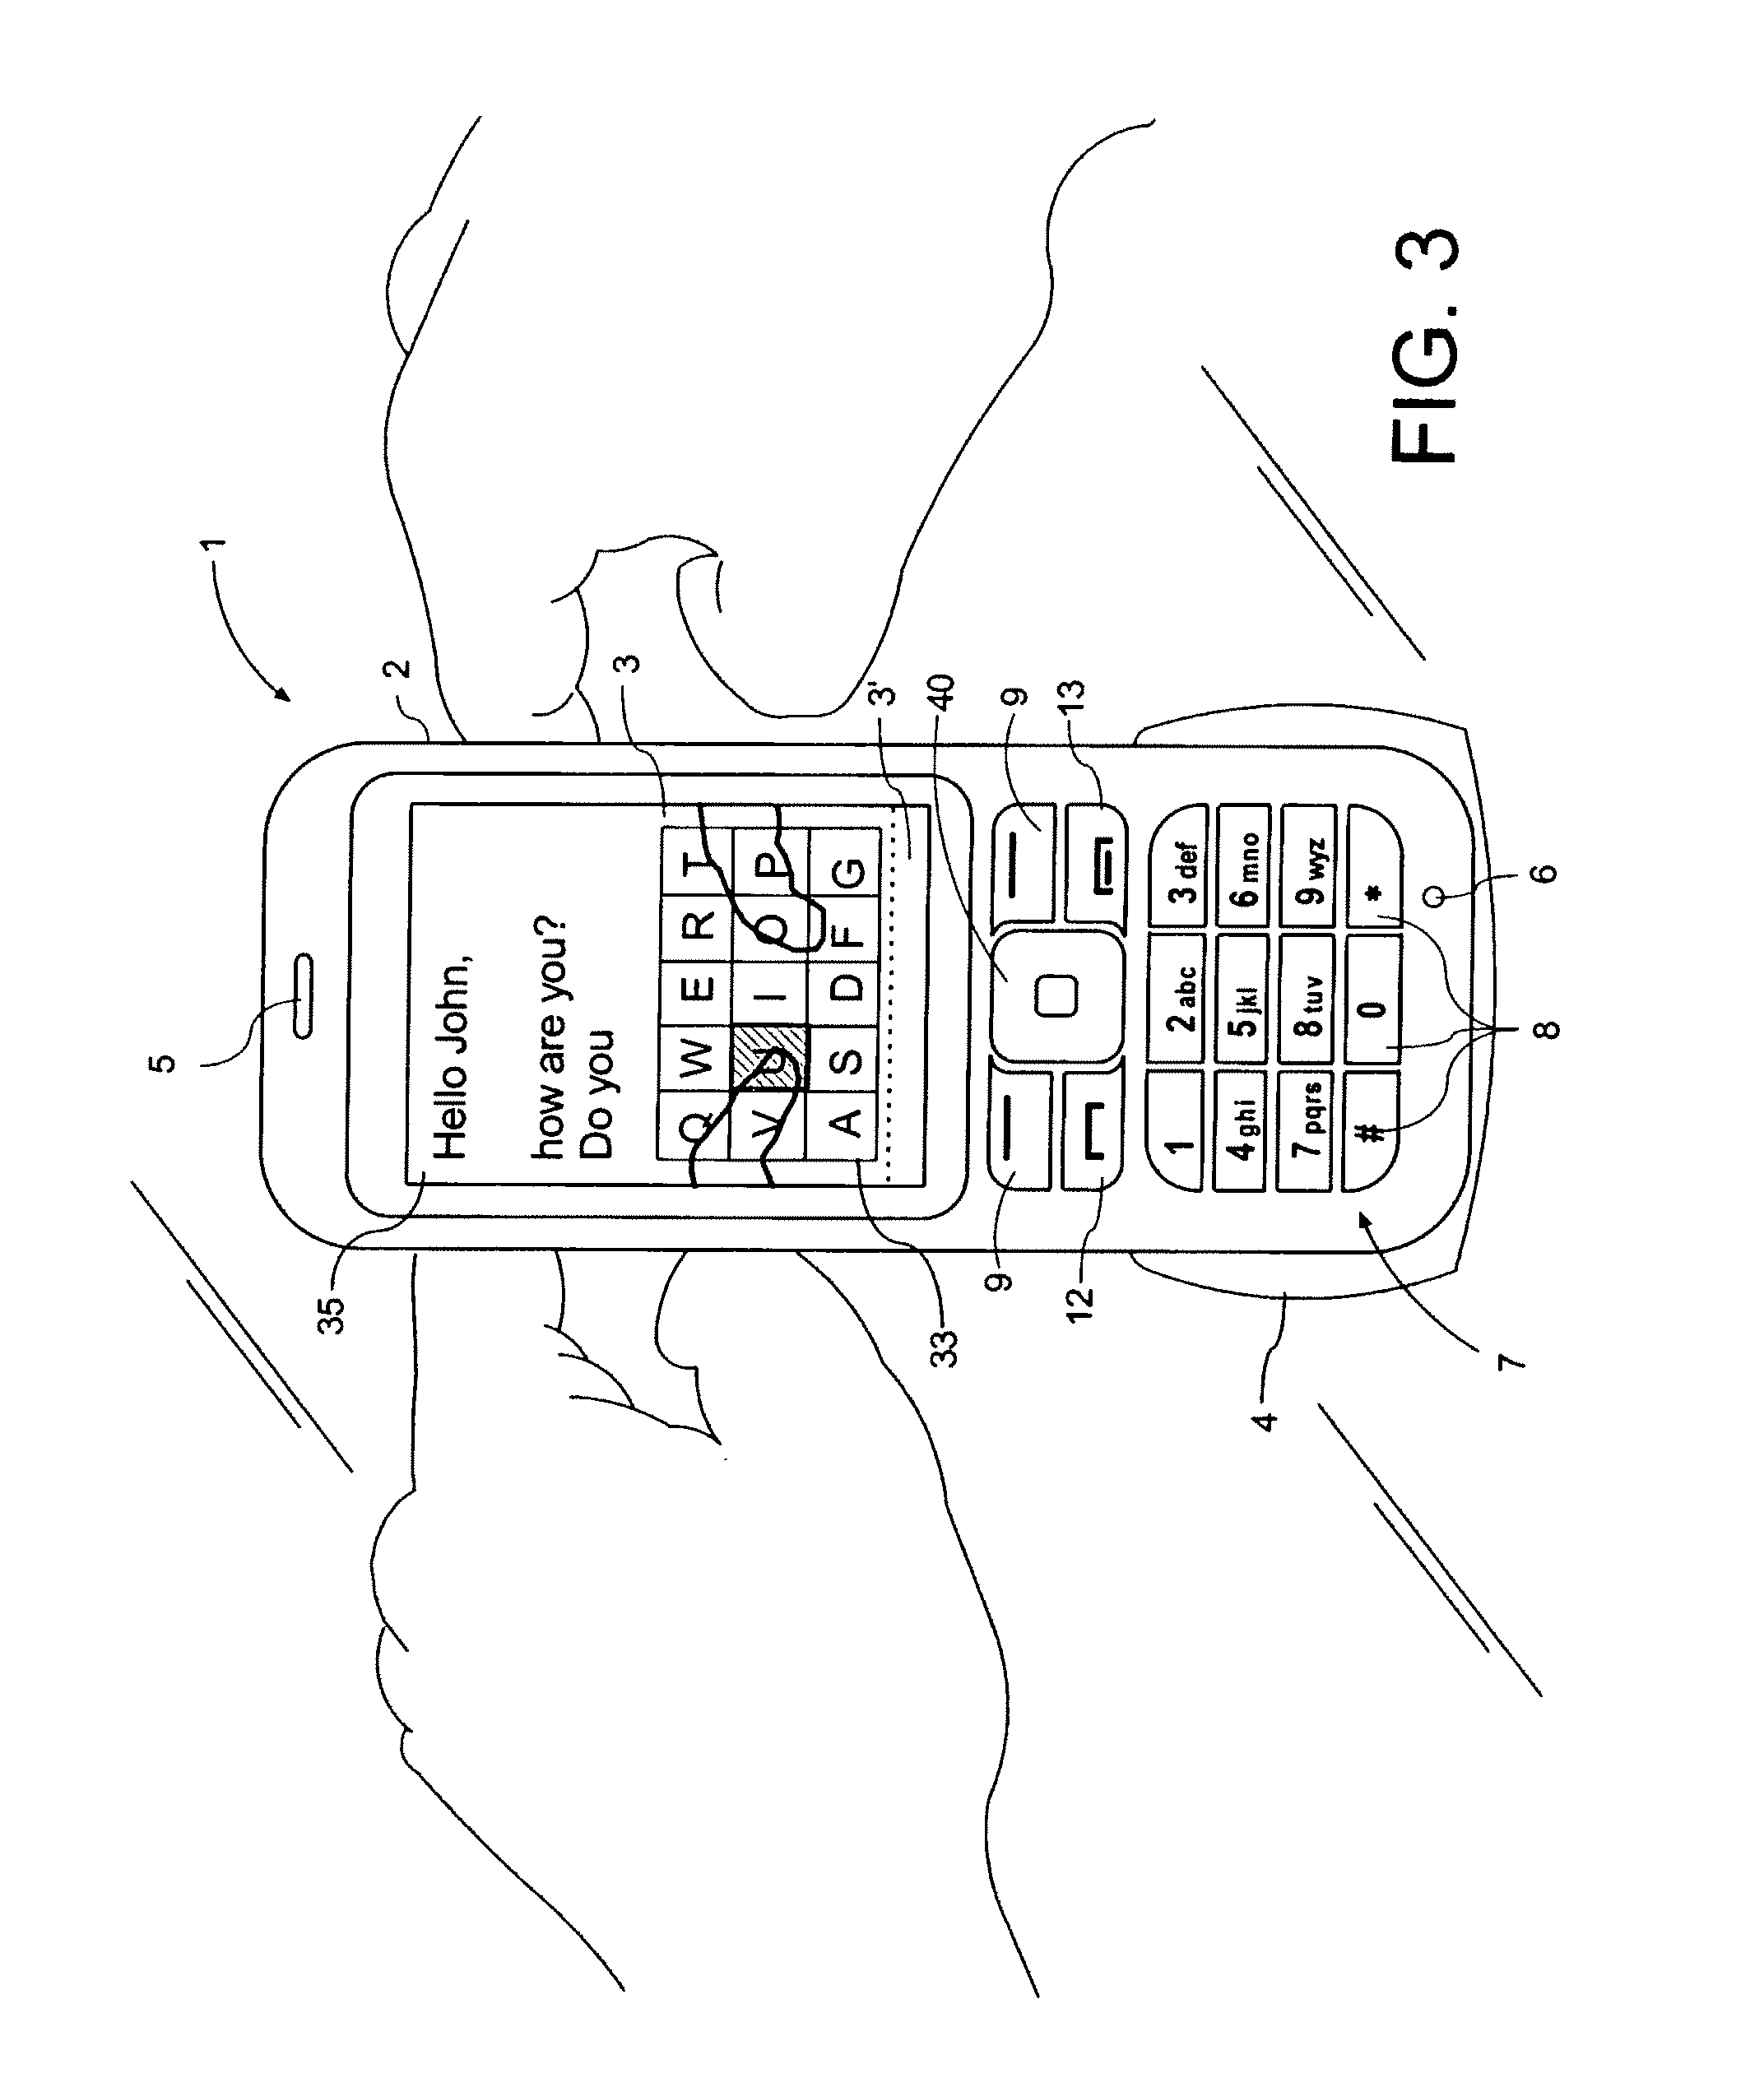 Mobile device with virtual keypad